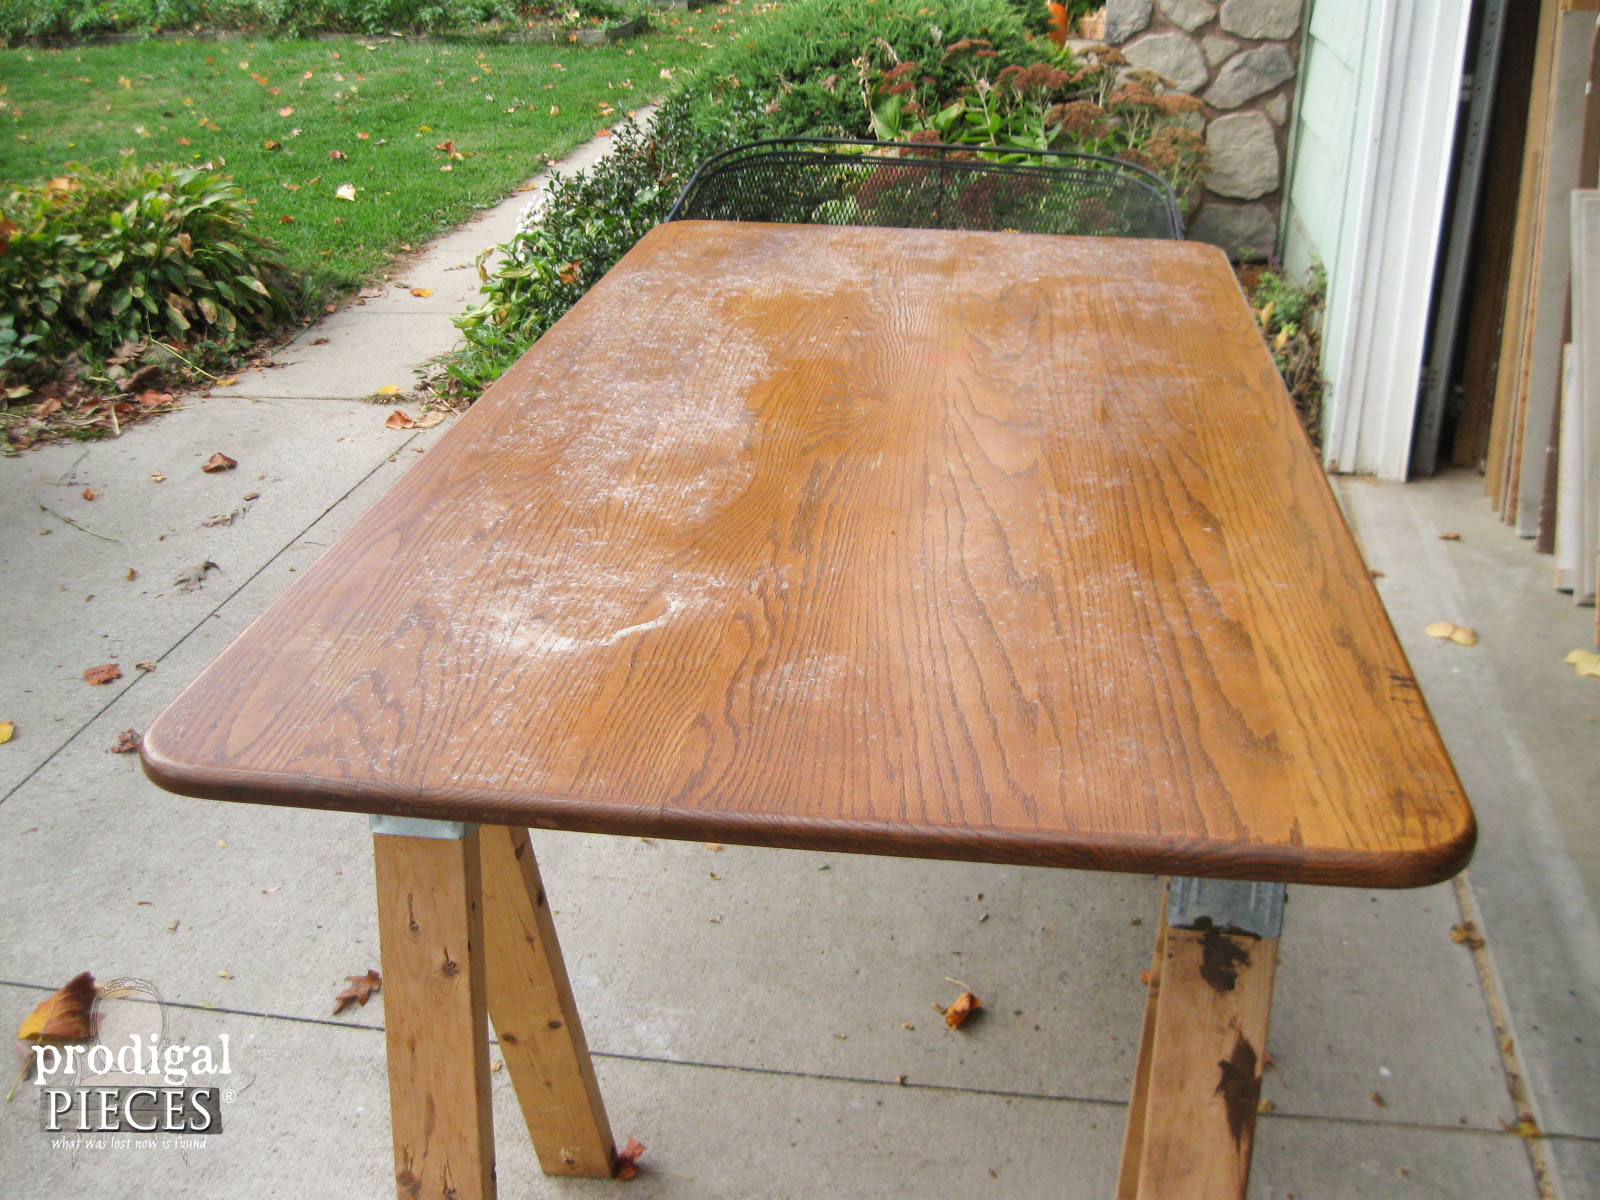 Farmhouse Table Before Whitewashed | Prodigal Pieces | www.prodigalpieces.com